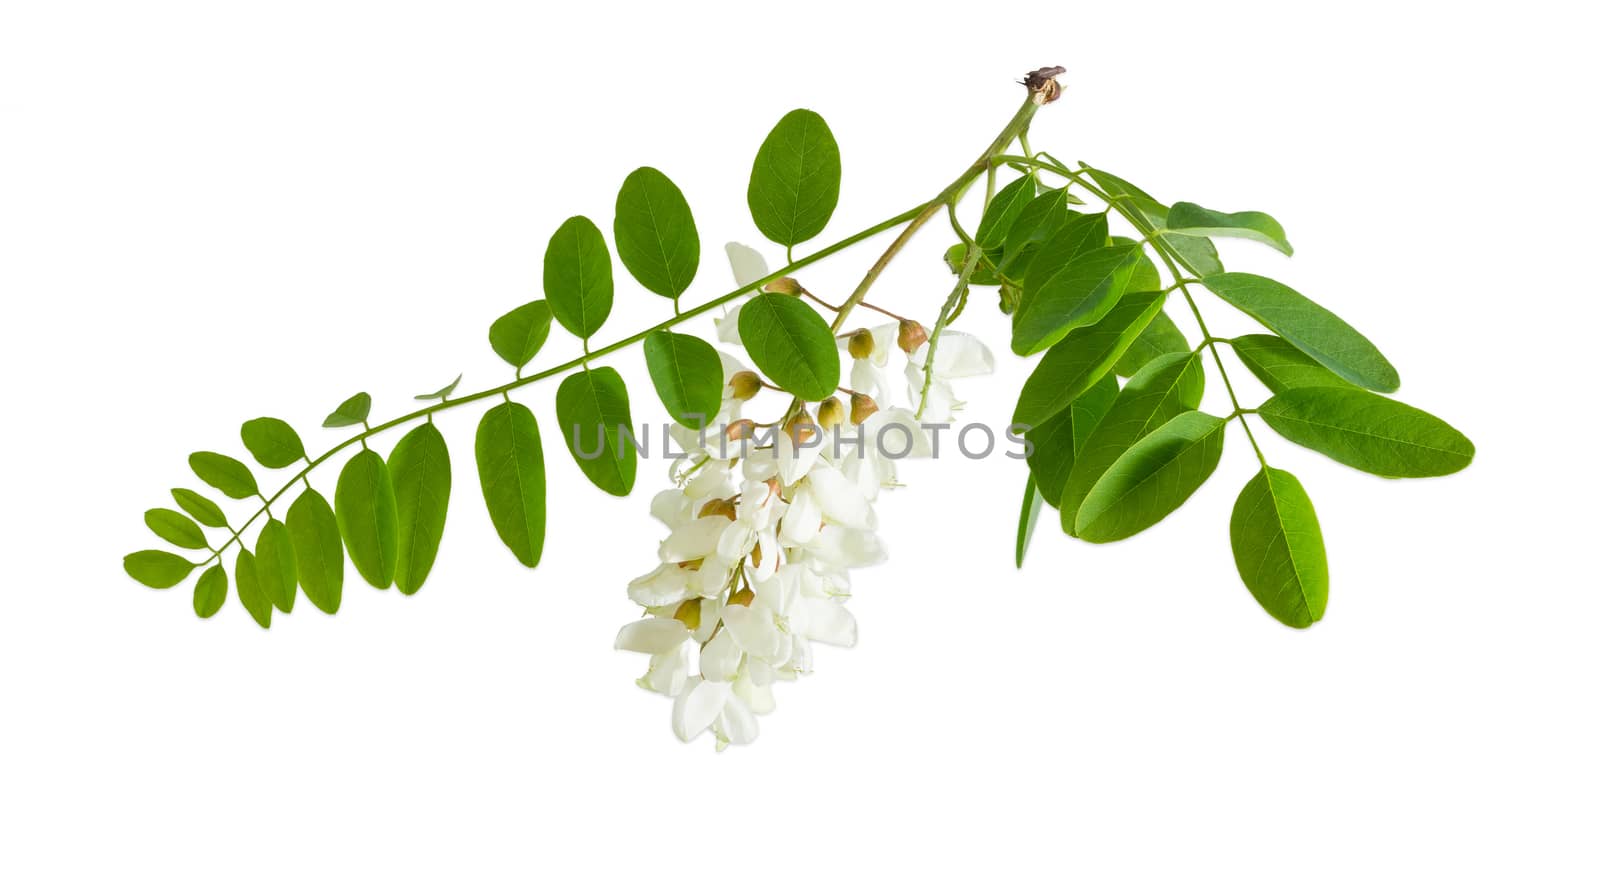 Branch of the blooming black locust tree with leaves and flower cluster on a light background
